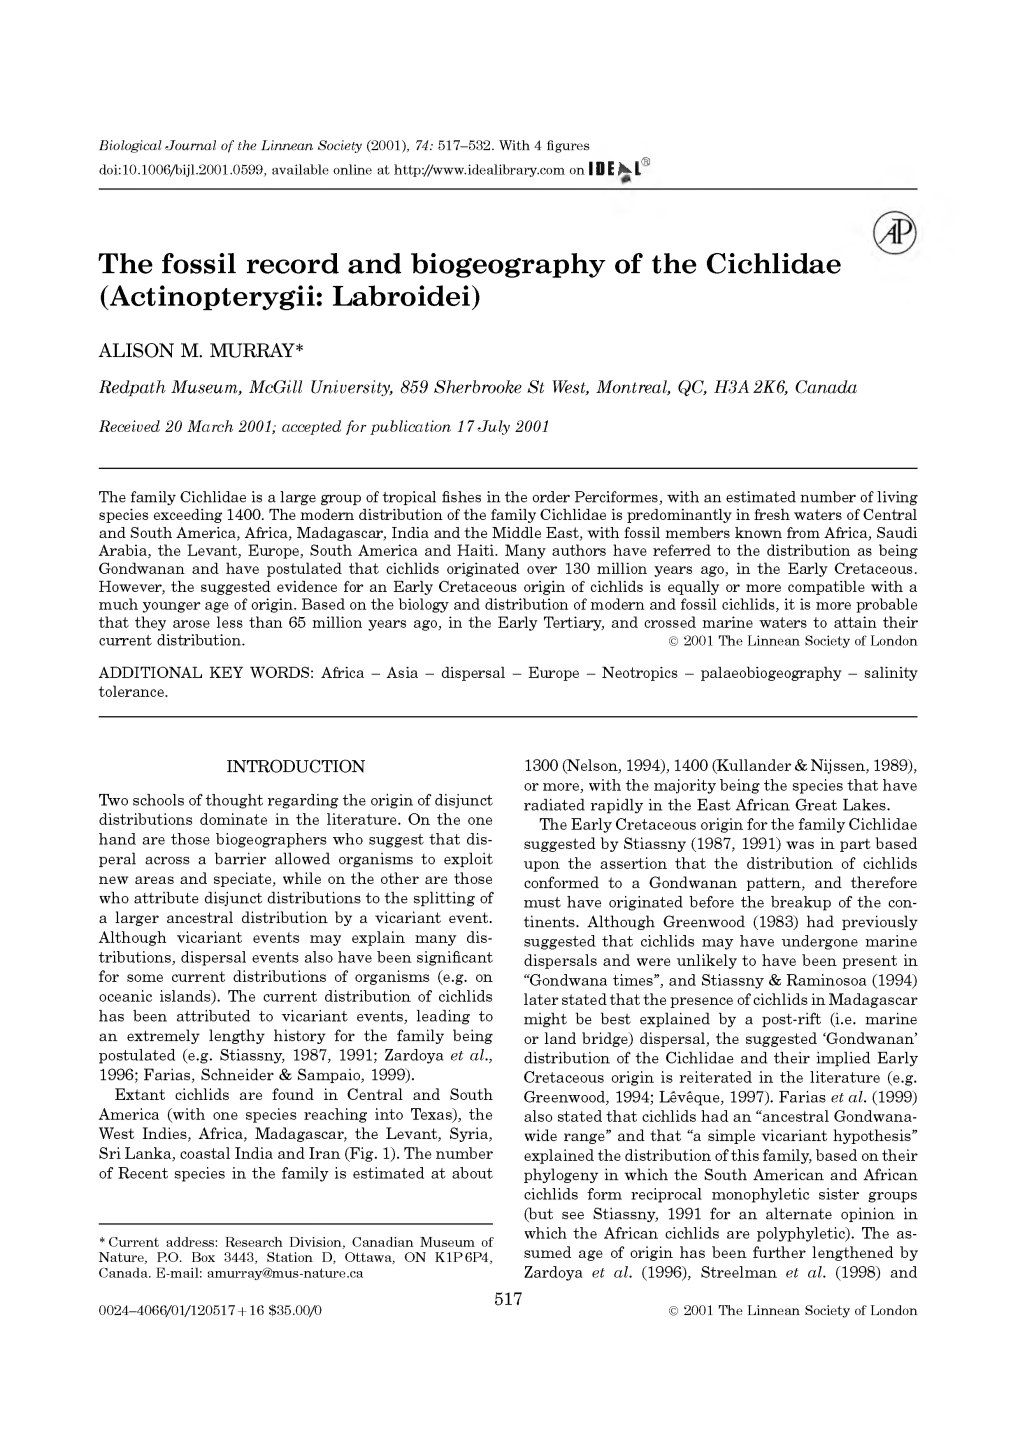 The Fossil Record and Biogeography of the Cichlidae (Actinopterygii: Labroidei)